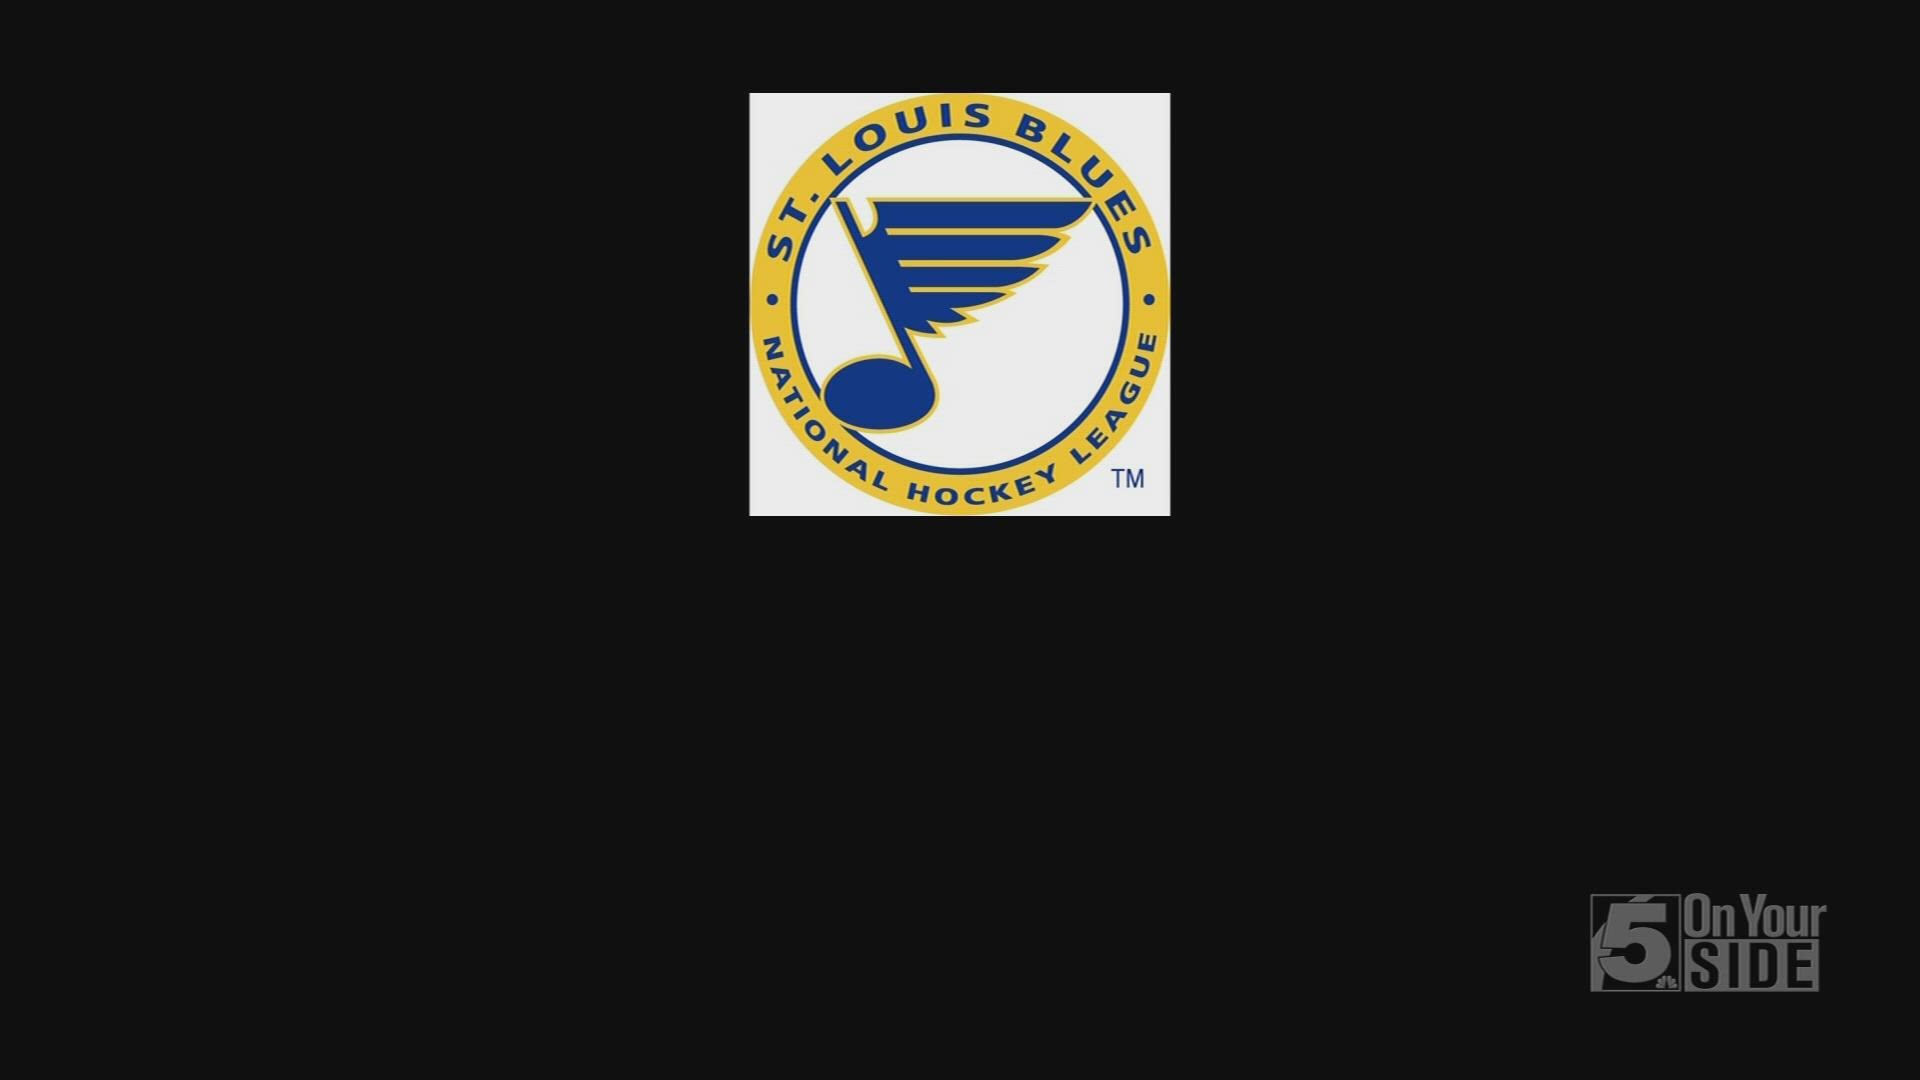 Documentary about the first 50 years of the St. Louis Blues Hockey team. This aired in St. Louis, MO, in 2016.